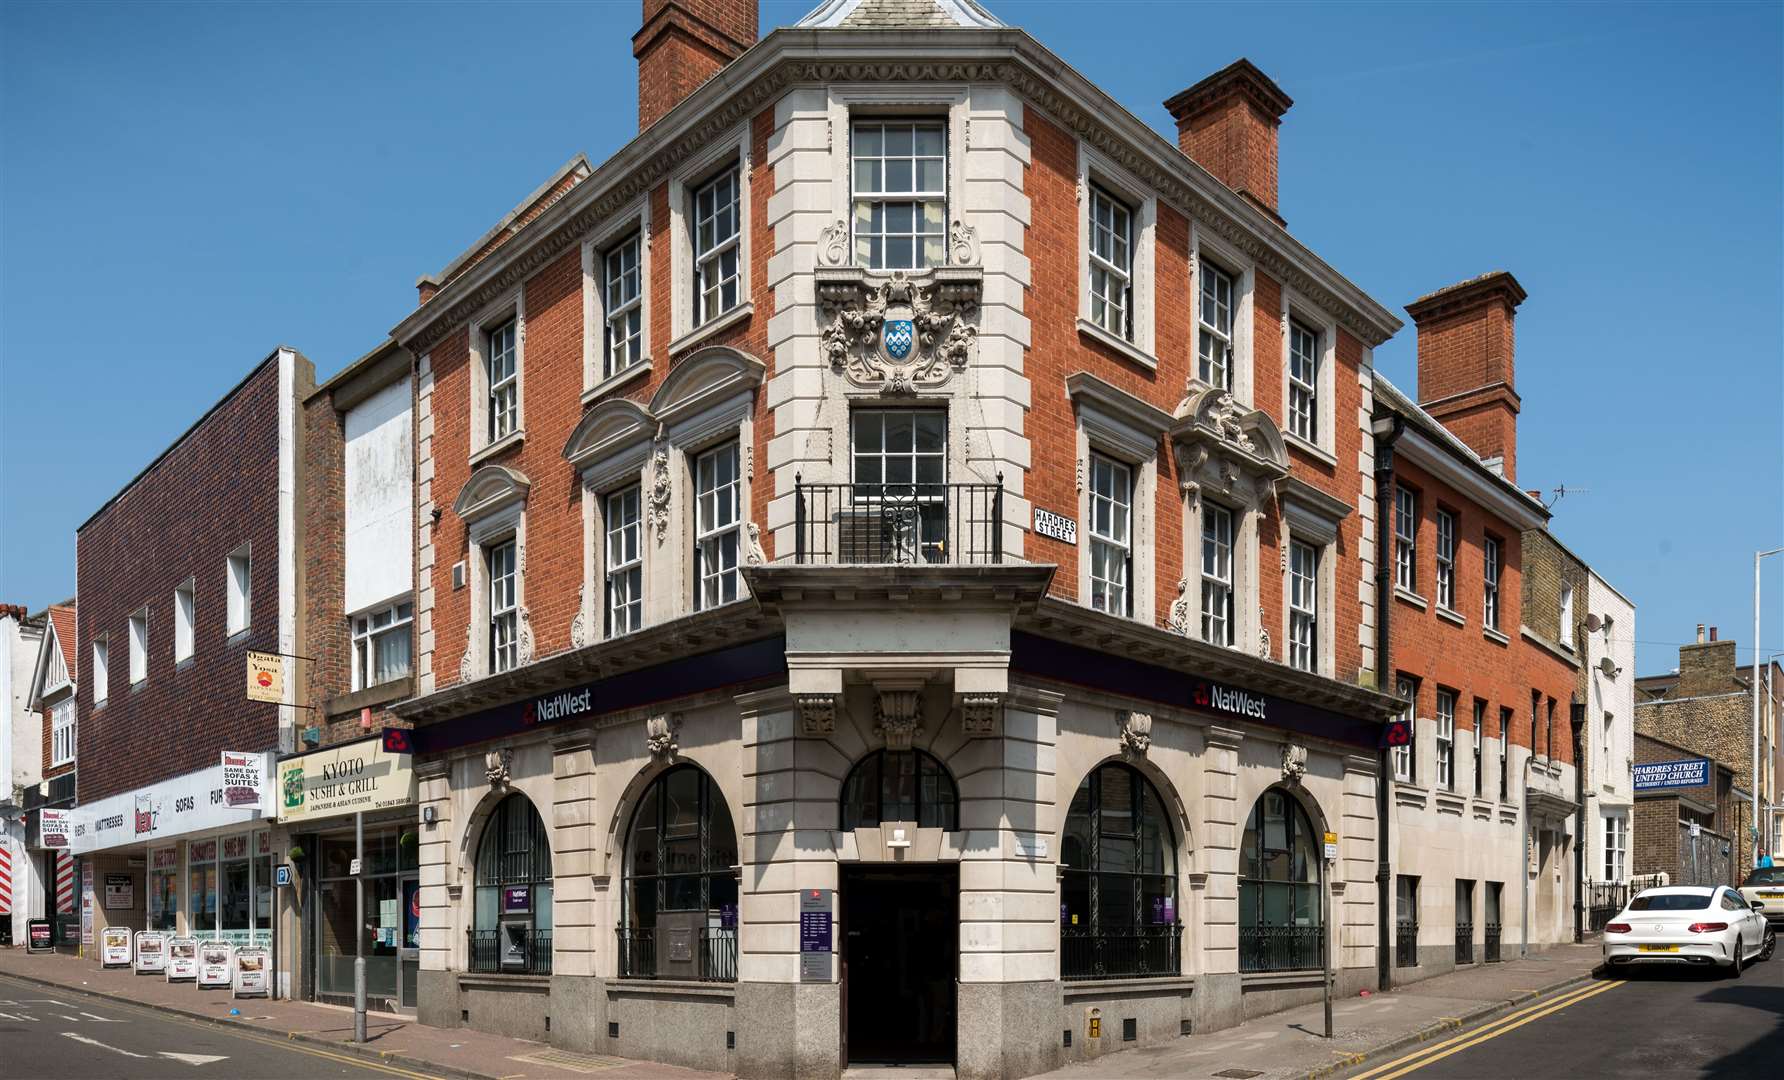 The Natwest bank in Ramsgate High Street. Picture: Historic England